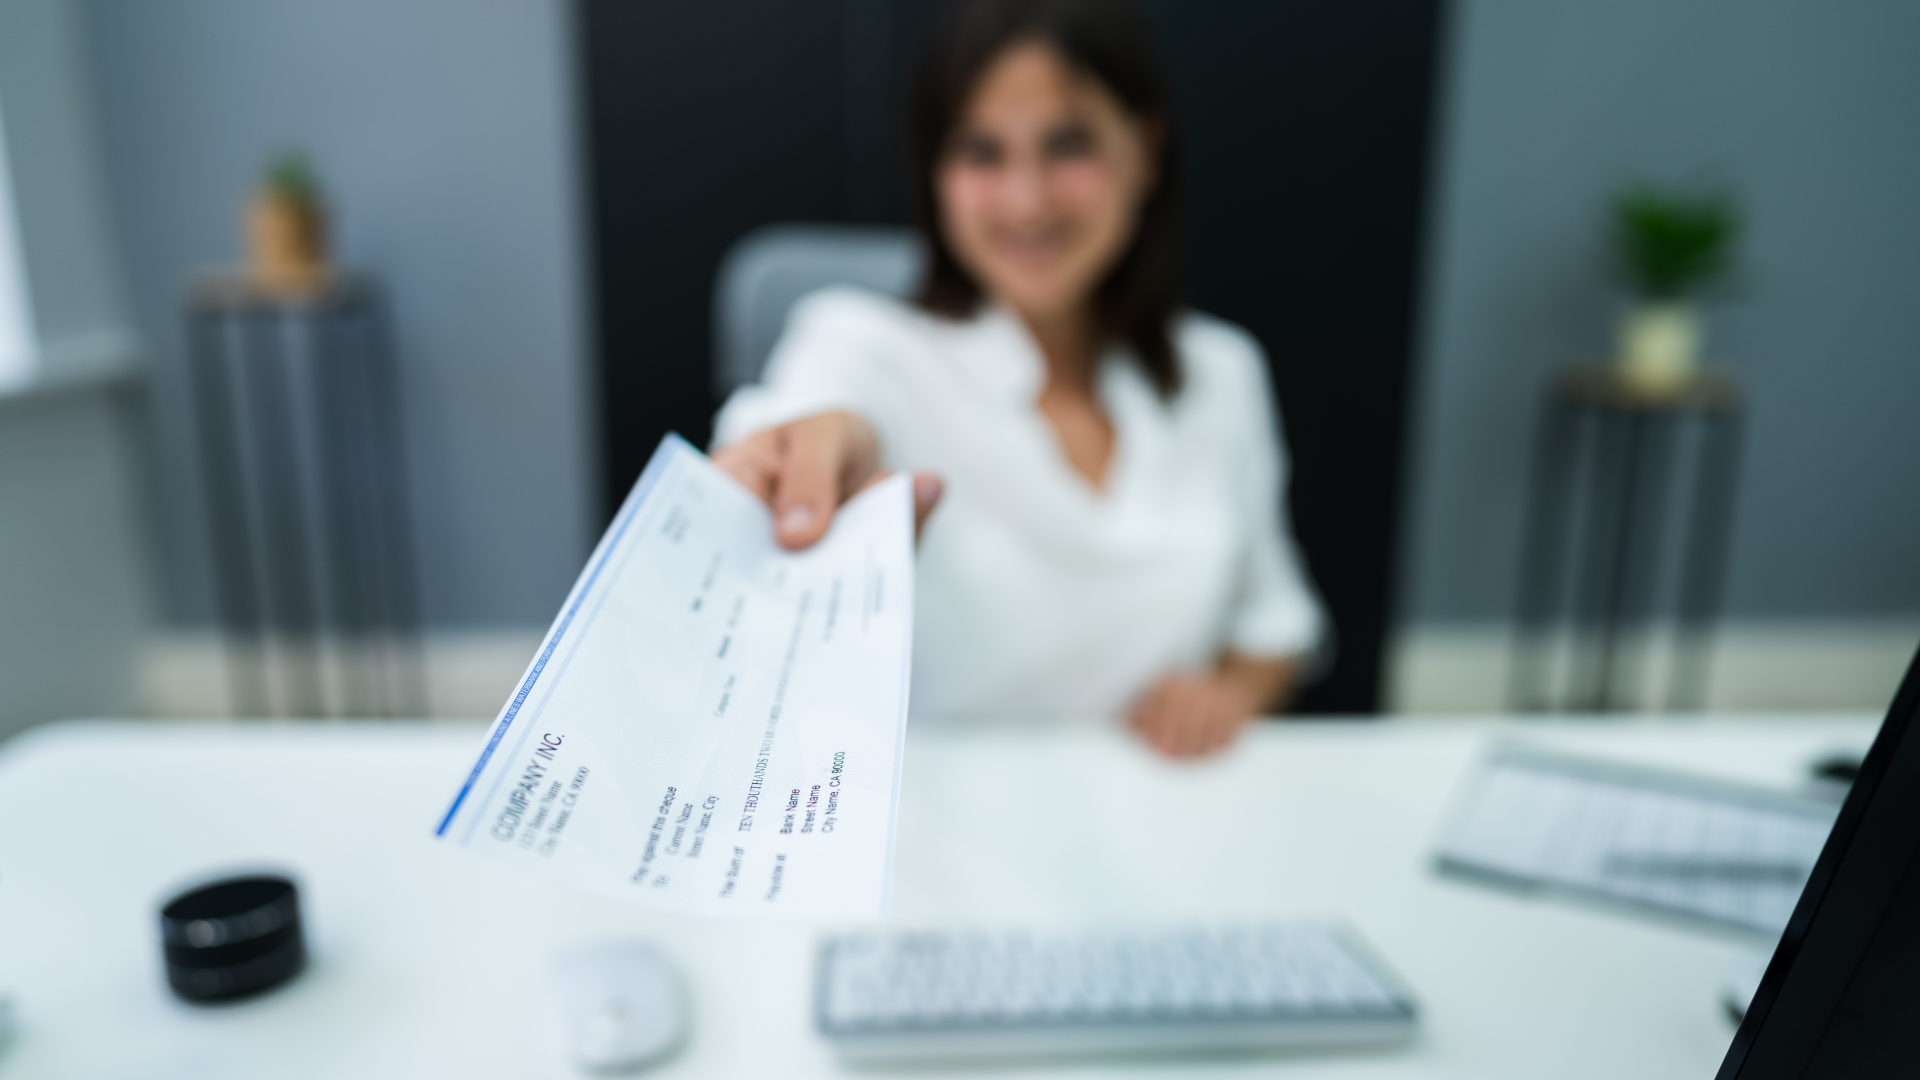 An image of an outsourced payroll manager with her arm stretched out holding a cheque for an employee